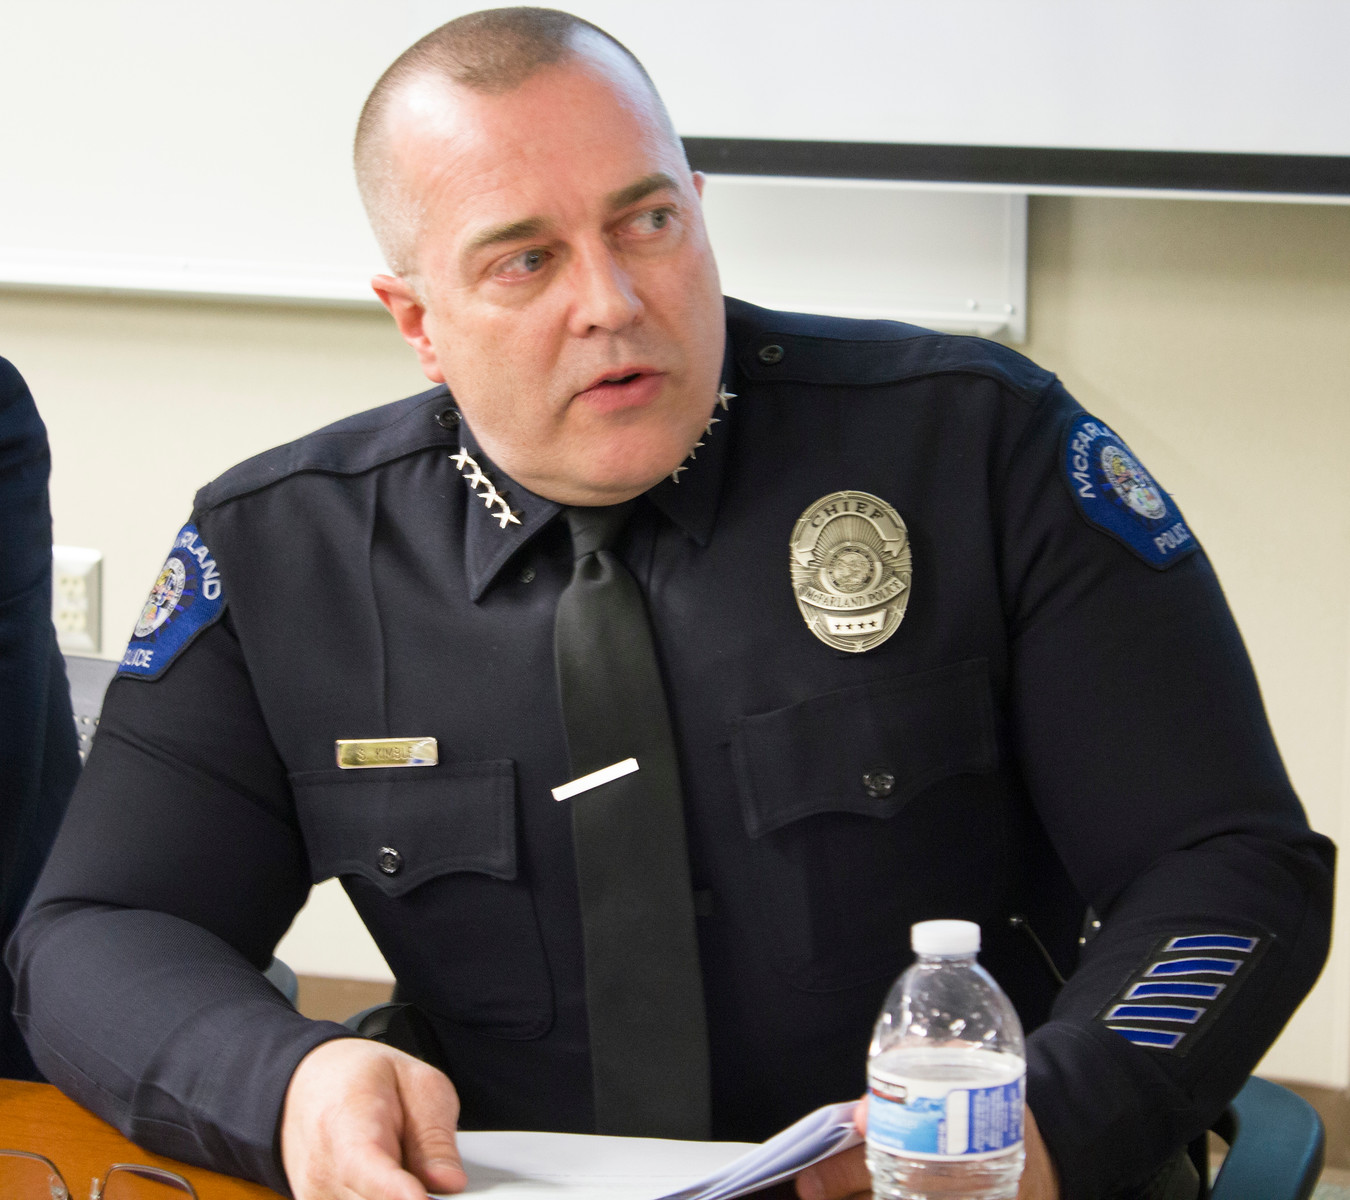 McFarland Police Department Chief